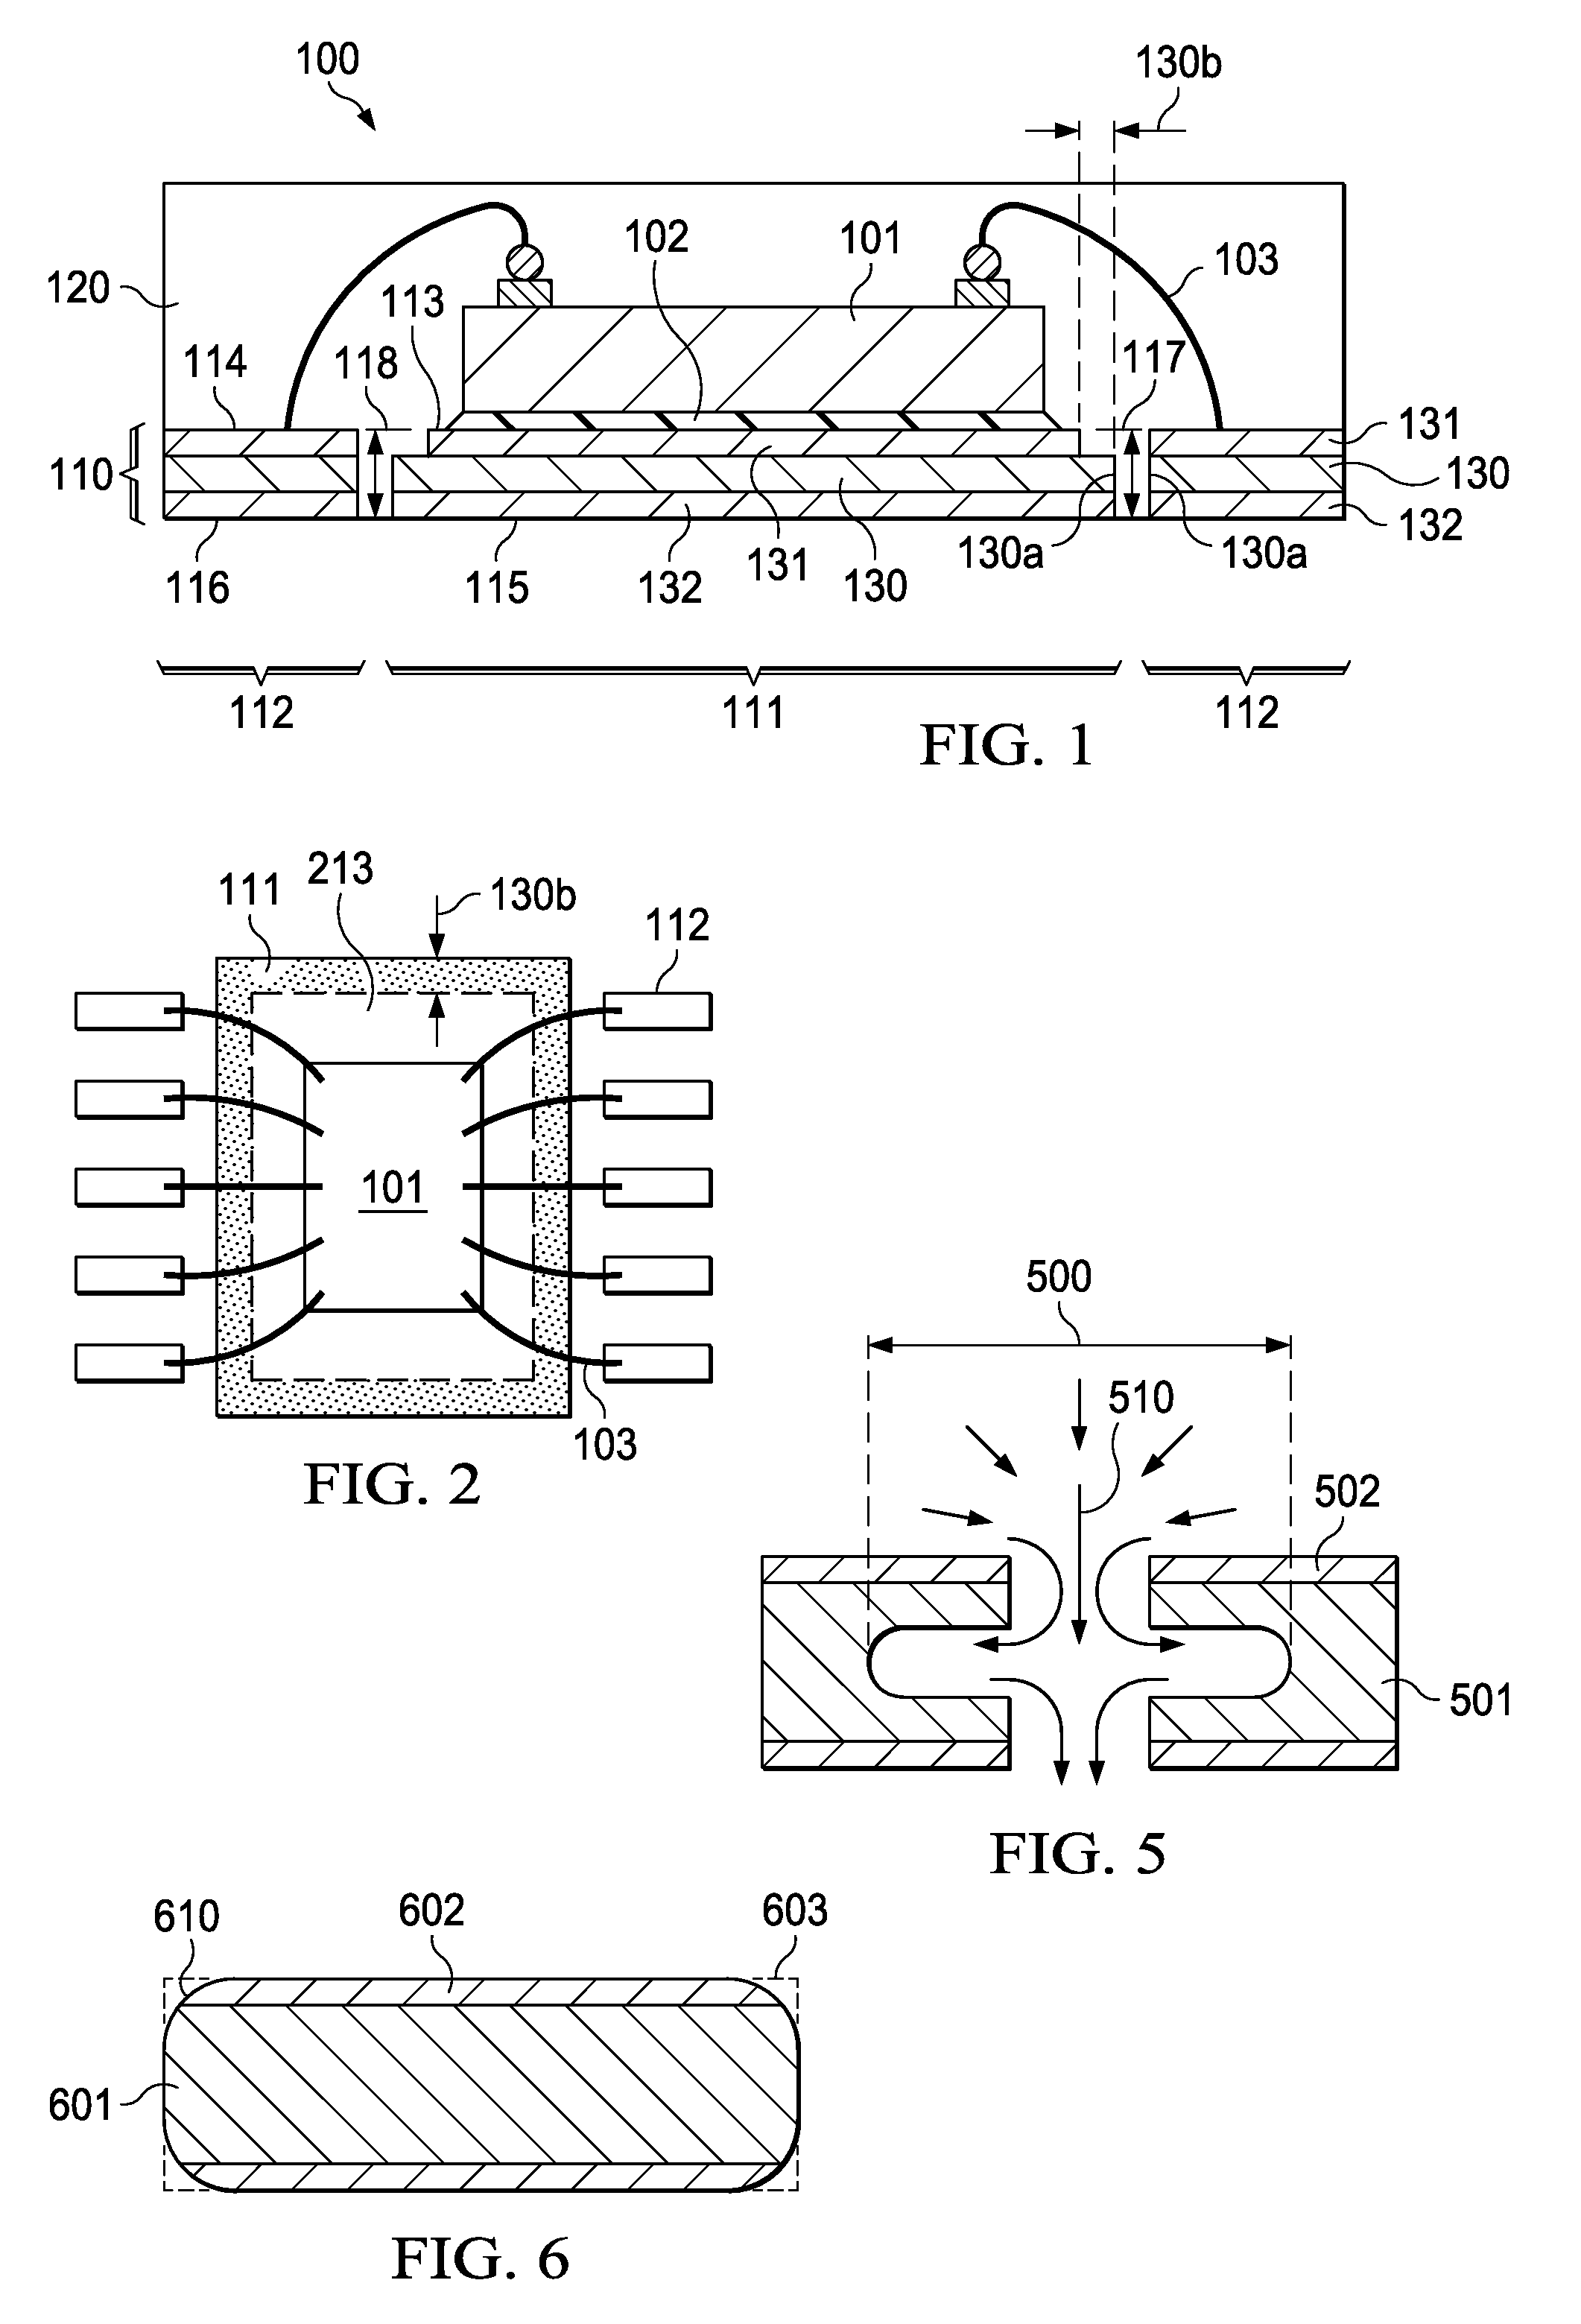 Method for Semiconductor Leadframes in Low Volume and Rapid Turnaround